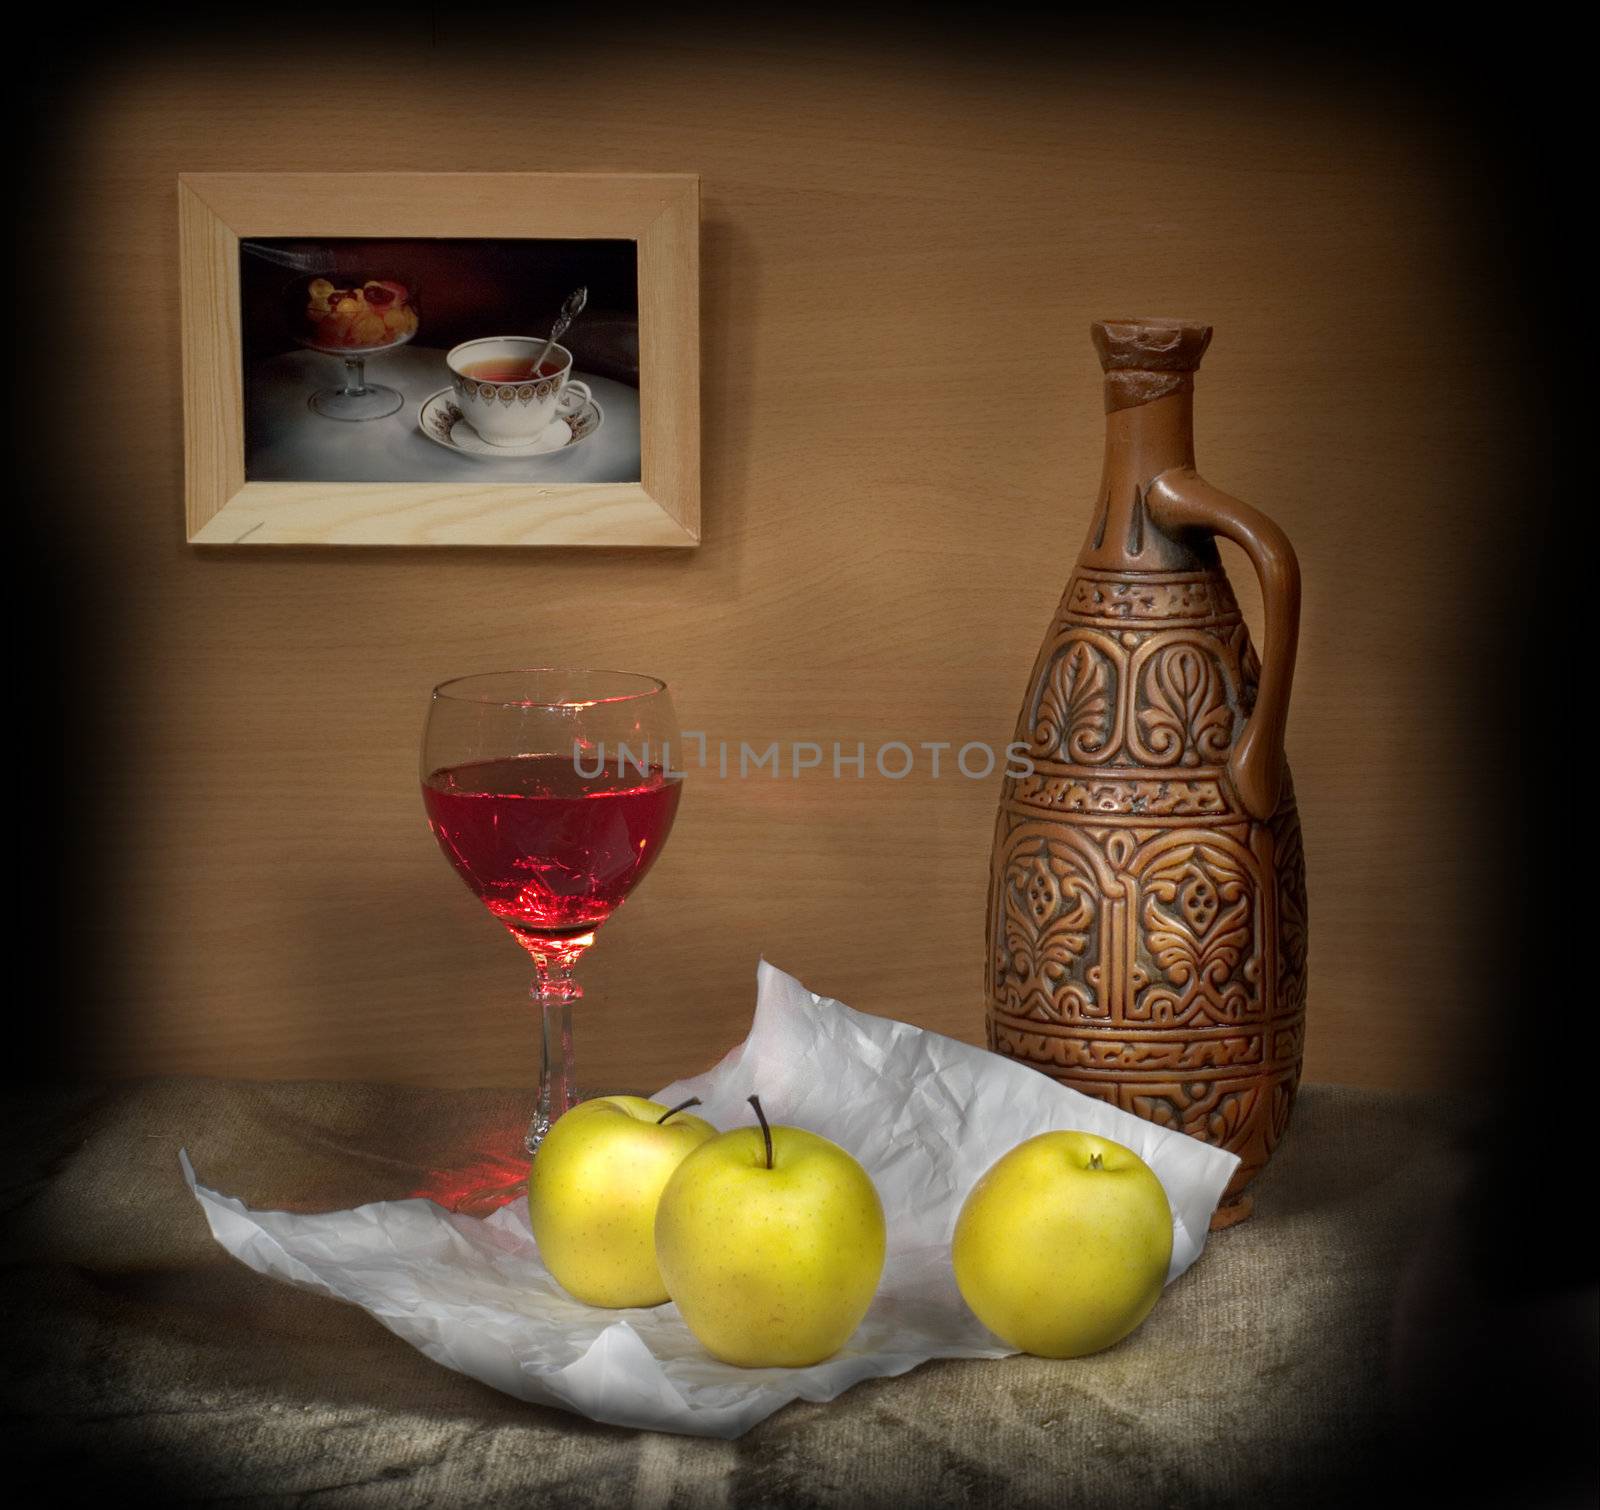 Glass of wine and apples by pzaxe